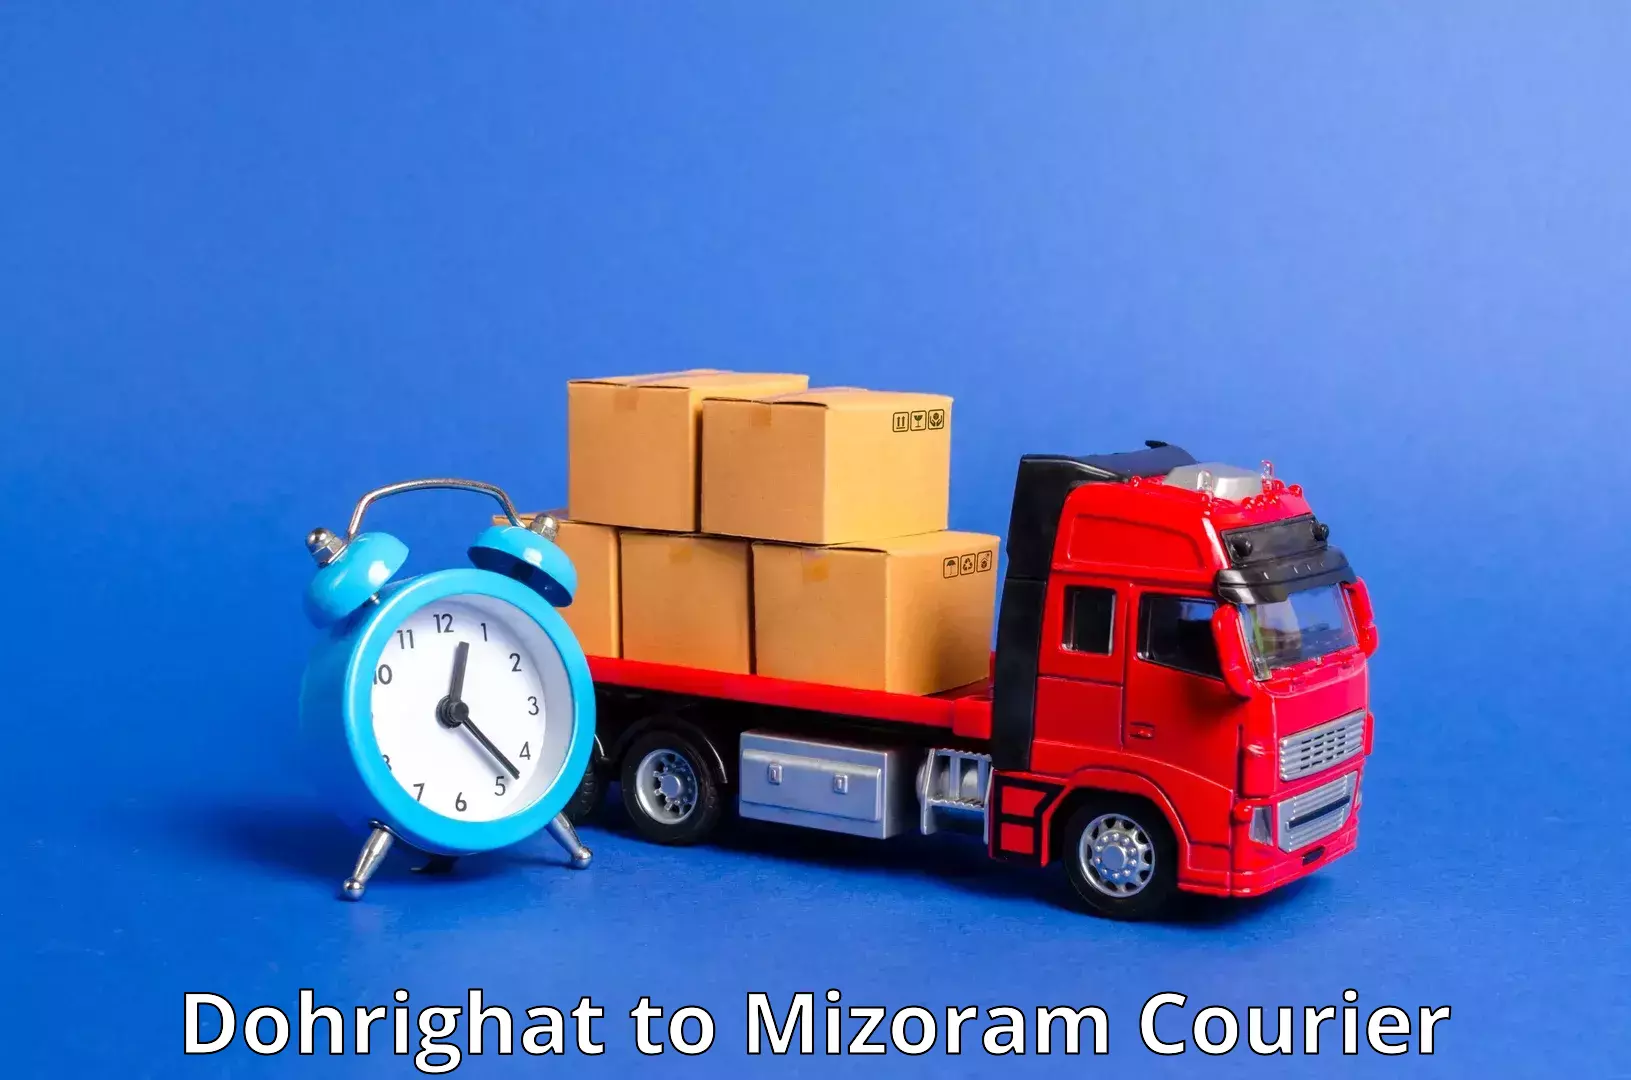 24/7 courier service Dohrighat to Darlawn